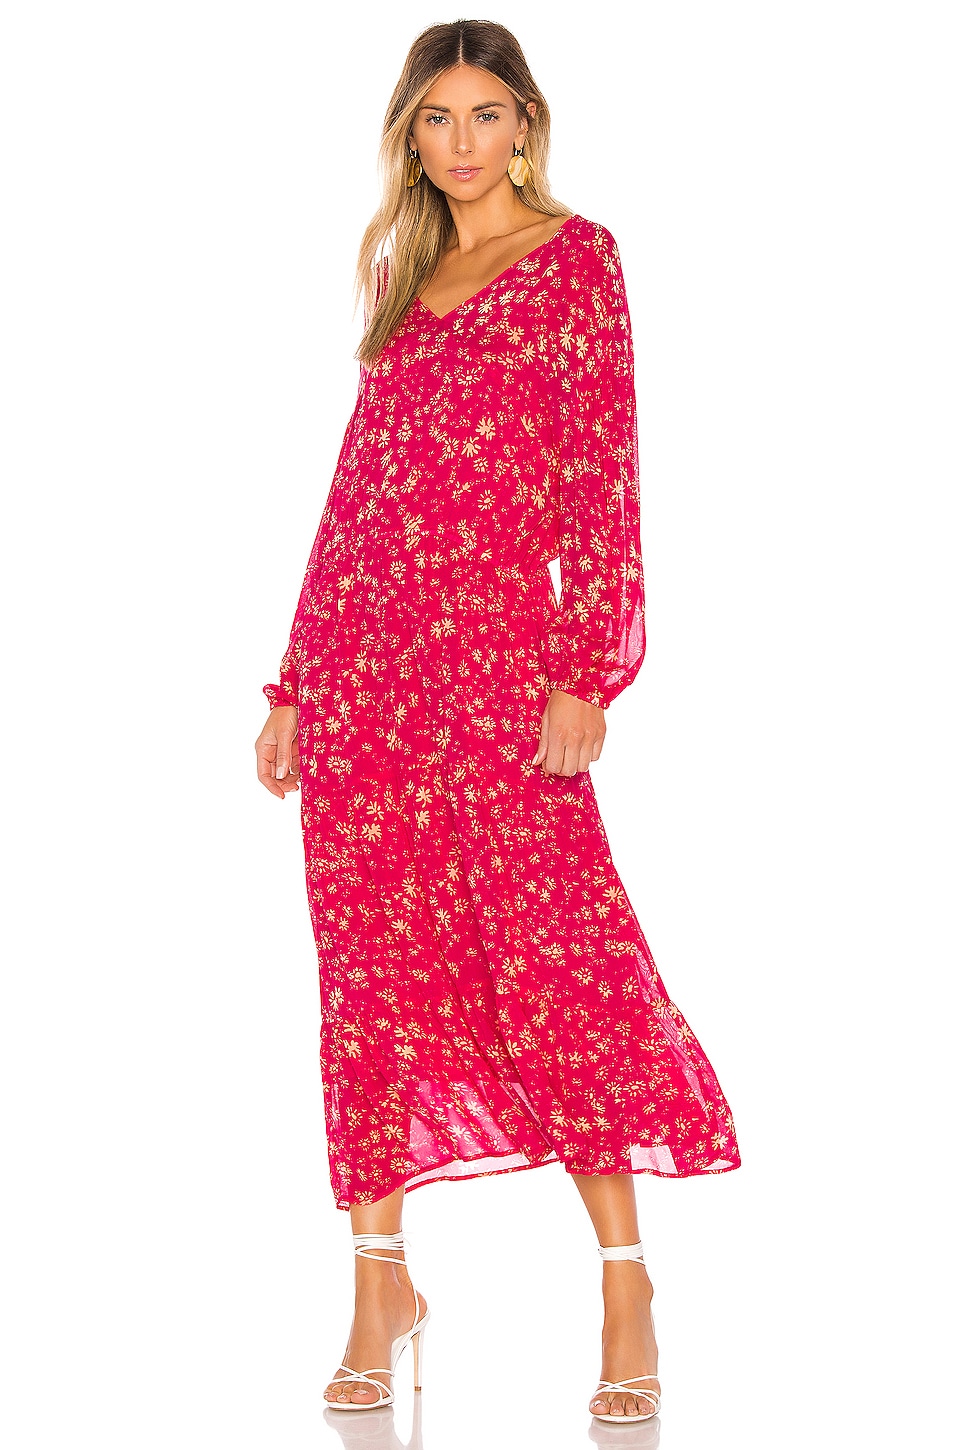 Free People Wall Flower Midi Dress in Red | REVOLVE